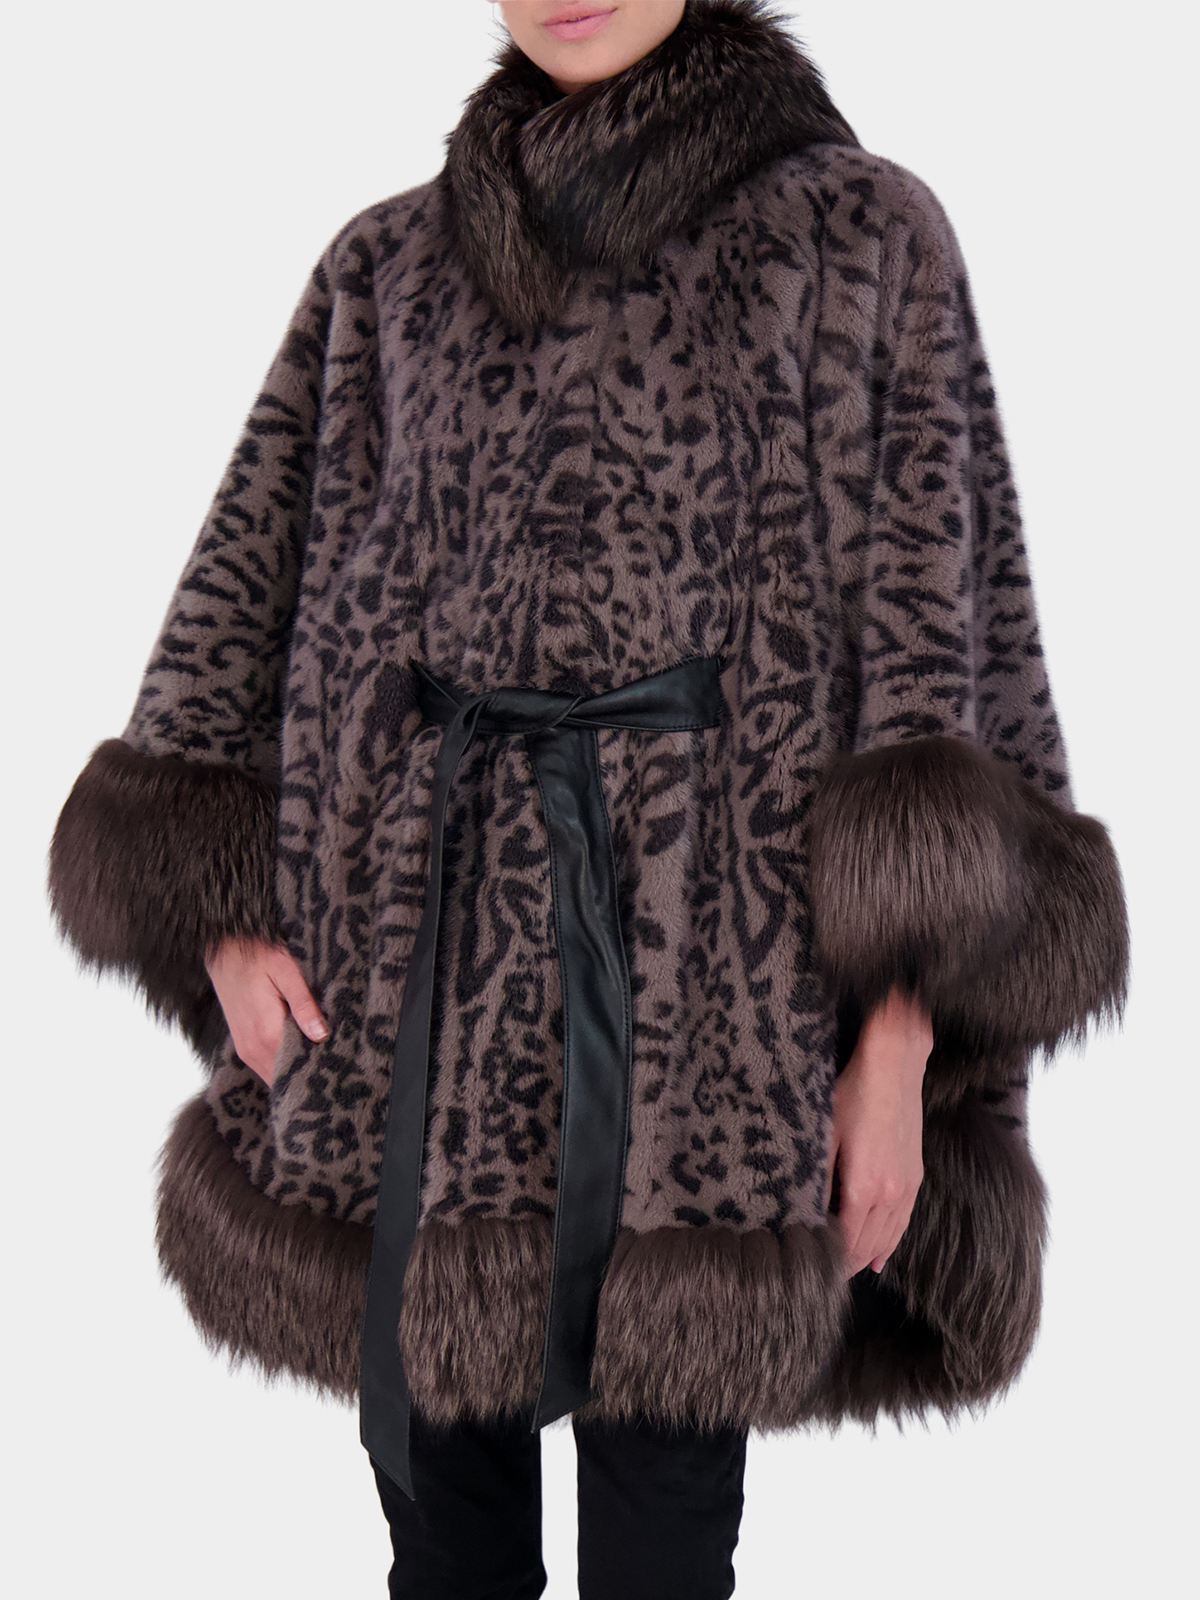 Woman's Gray Animal Print Mink Fur Cape with Silver Fox Collar and Border